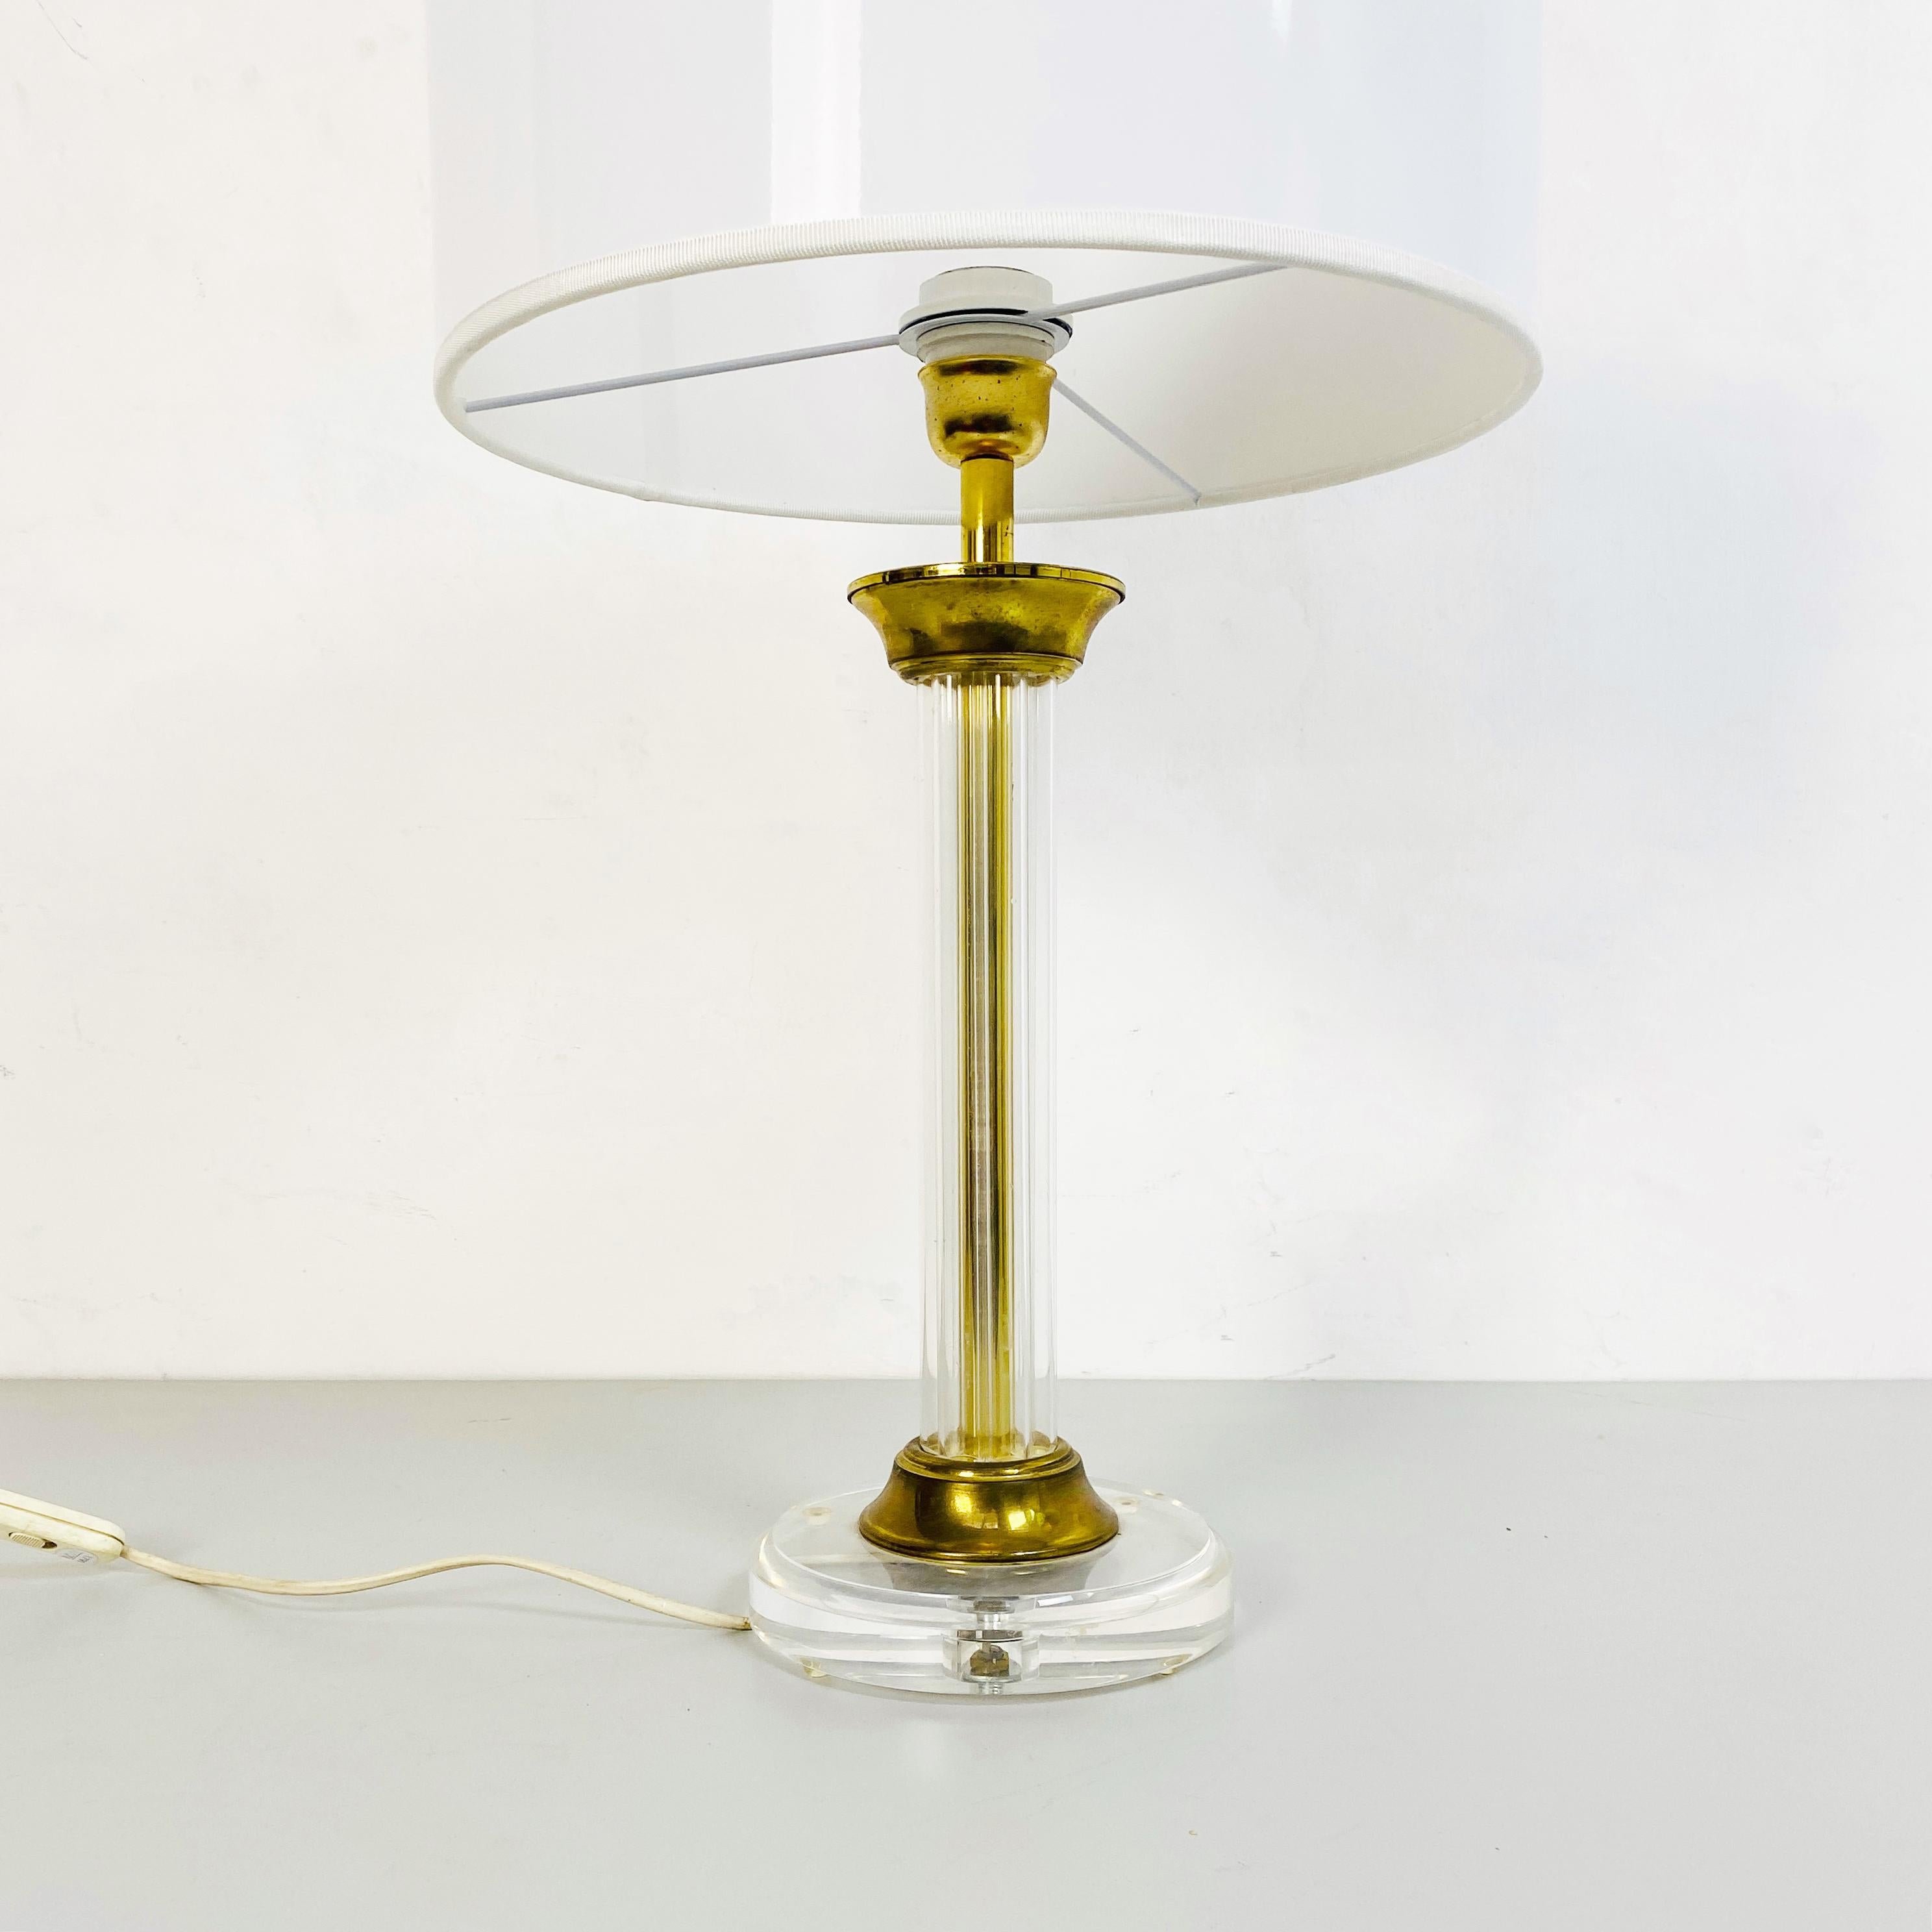 Italian Mid-Century Column-Shaped Plexiglass and Brass Table Lamp, 1970s For Sale 1